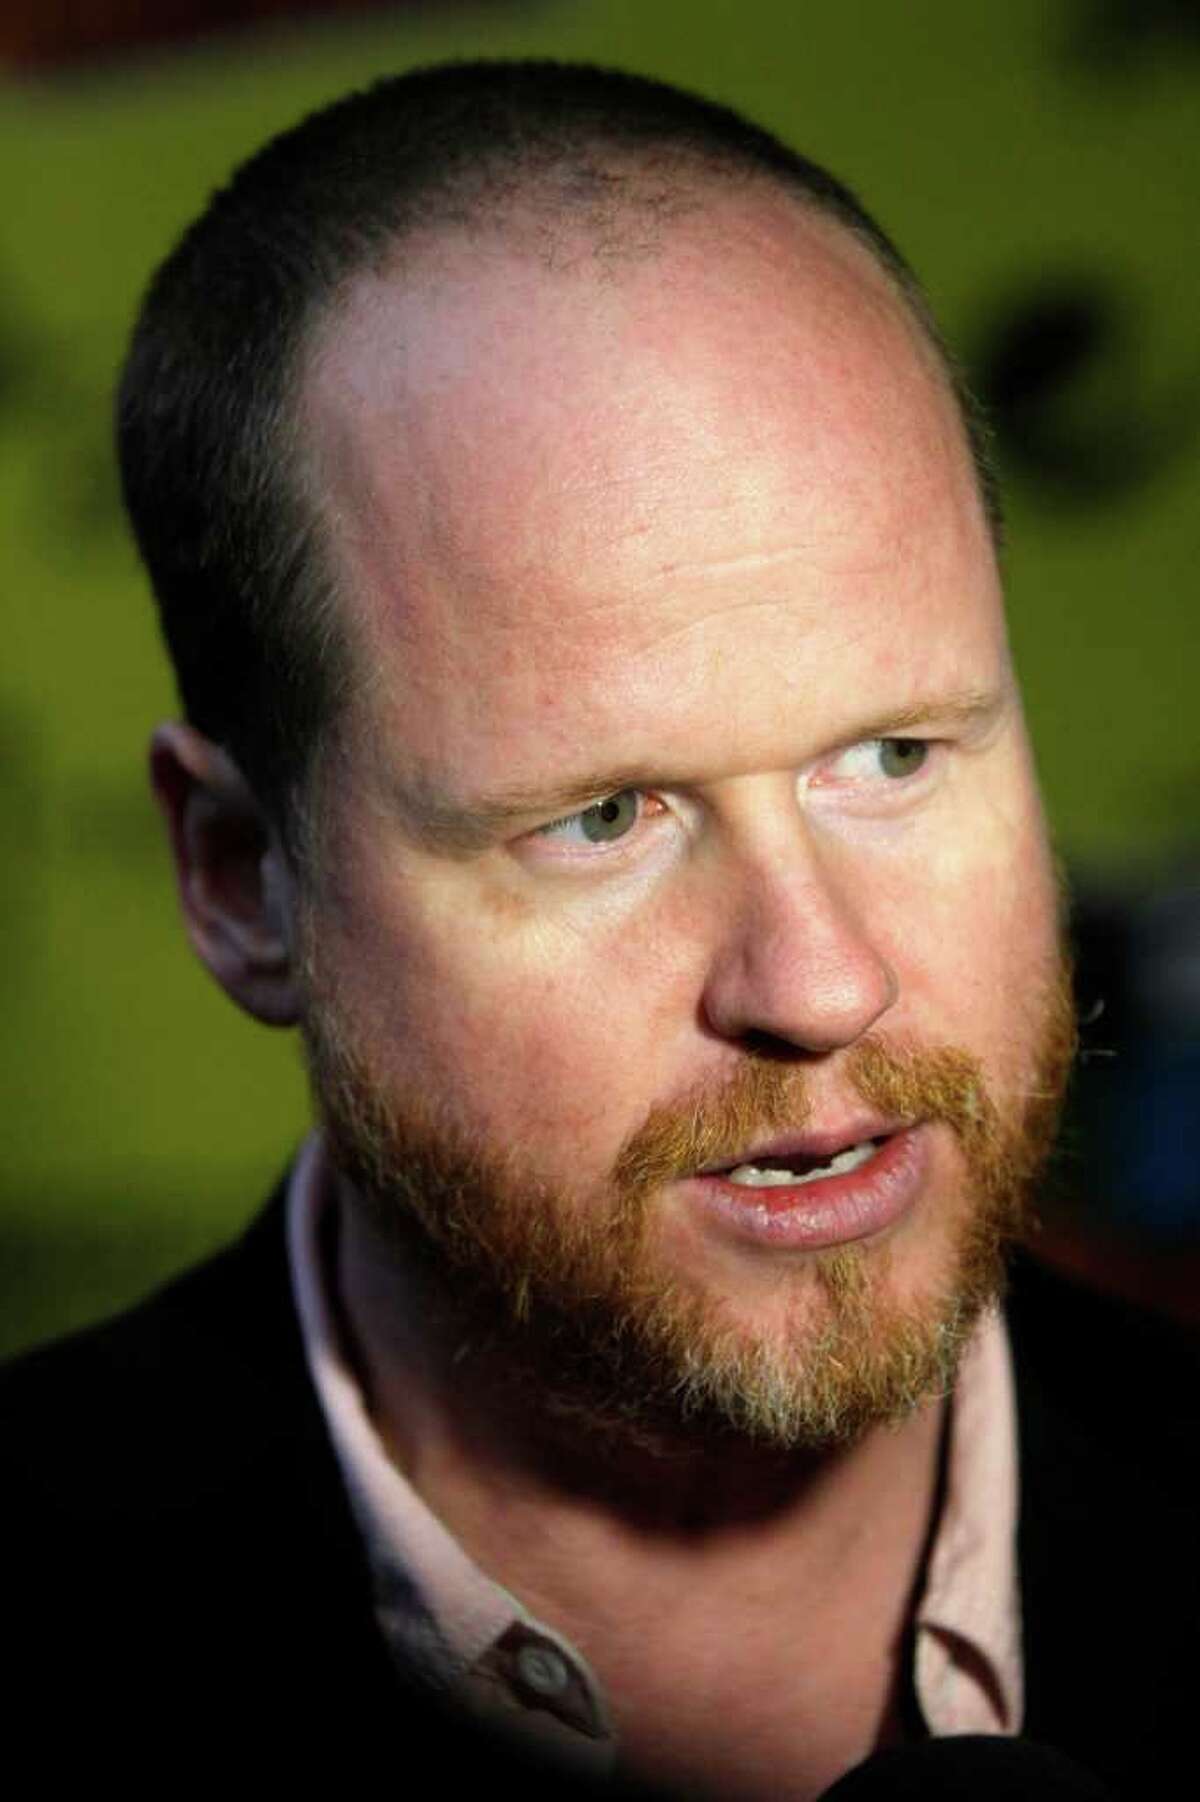 'The Cabin In The Woods' writer Joss Whedon arrives at a screening of the movie at the SXSW Film Festival and Conference in Austin, Texas on Saturday, March 10, 2012.(AP Photo/Jack Plunkett